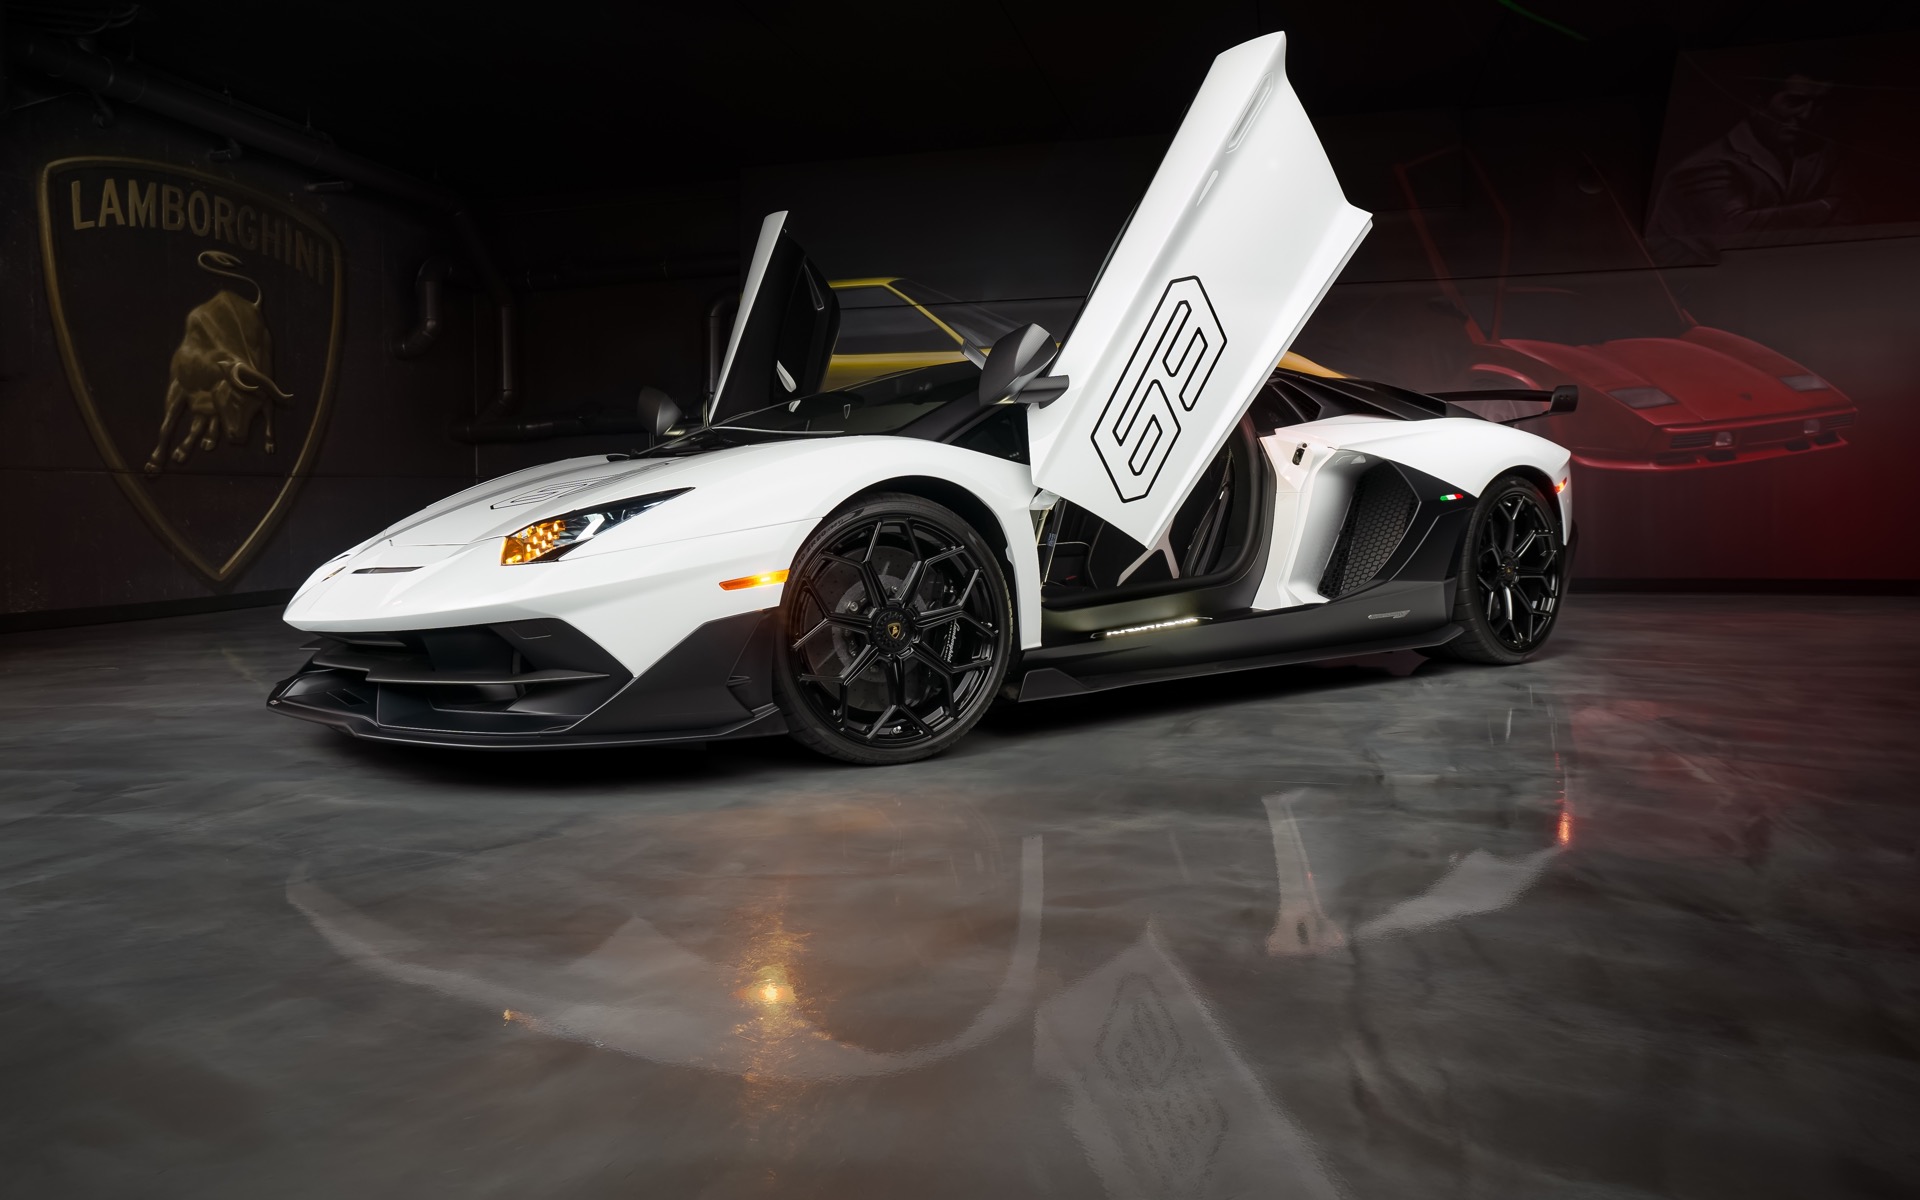 Used 2020 Lamborghini Aventador SVJ 63 LP770-4 SVJ63 Coupe ONLY 120 Miles!  SUPER RARE EXAMPLE! TONS of Carbon! For Sale (Special Pricing) | Chicago  Motor Cars Stock #19500